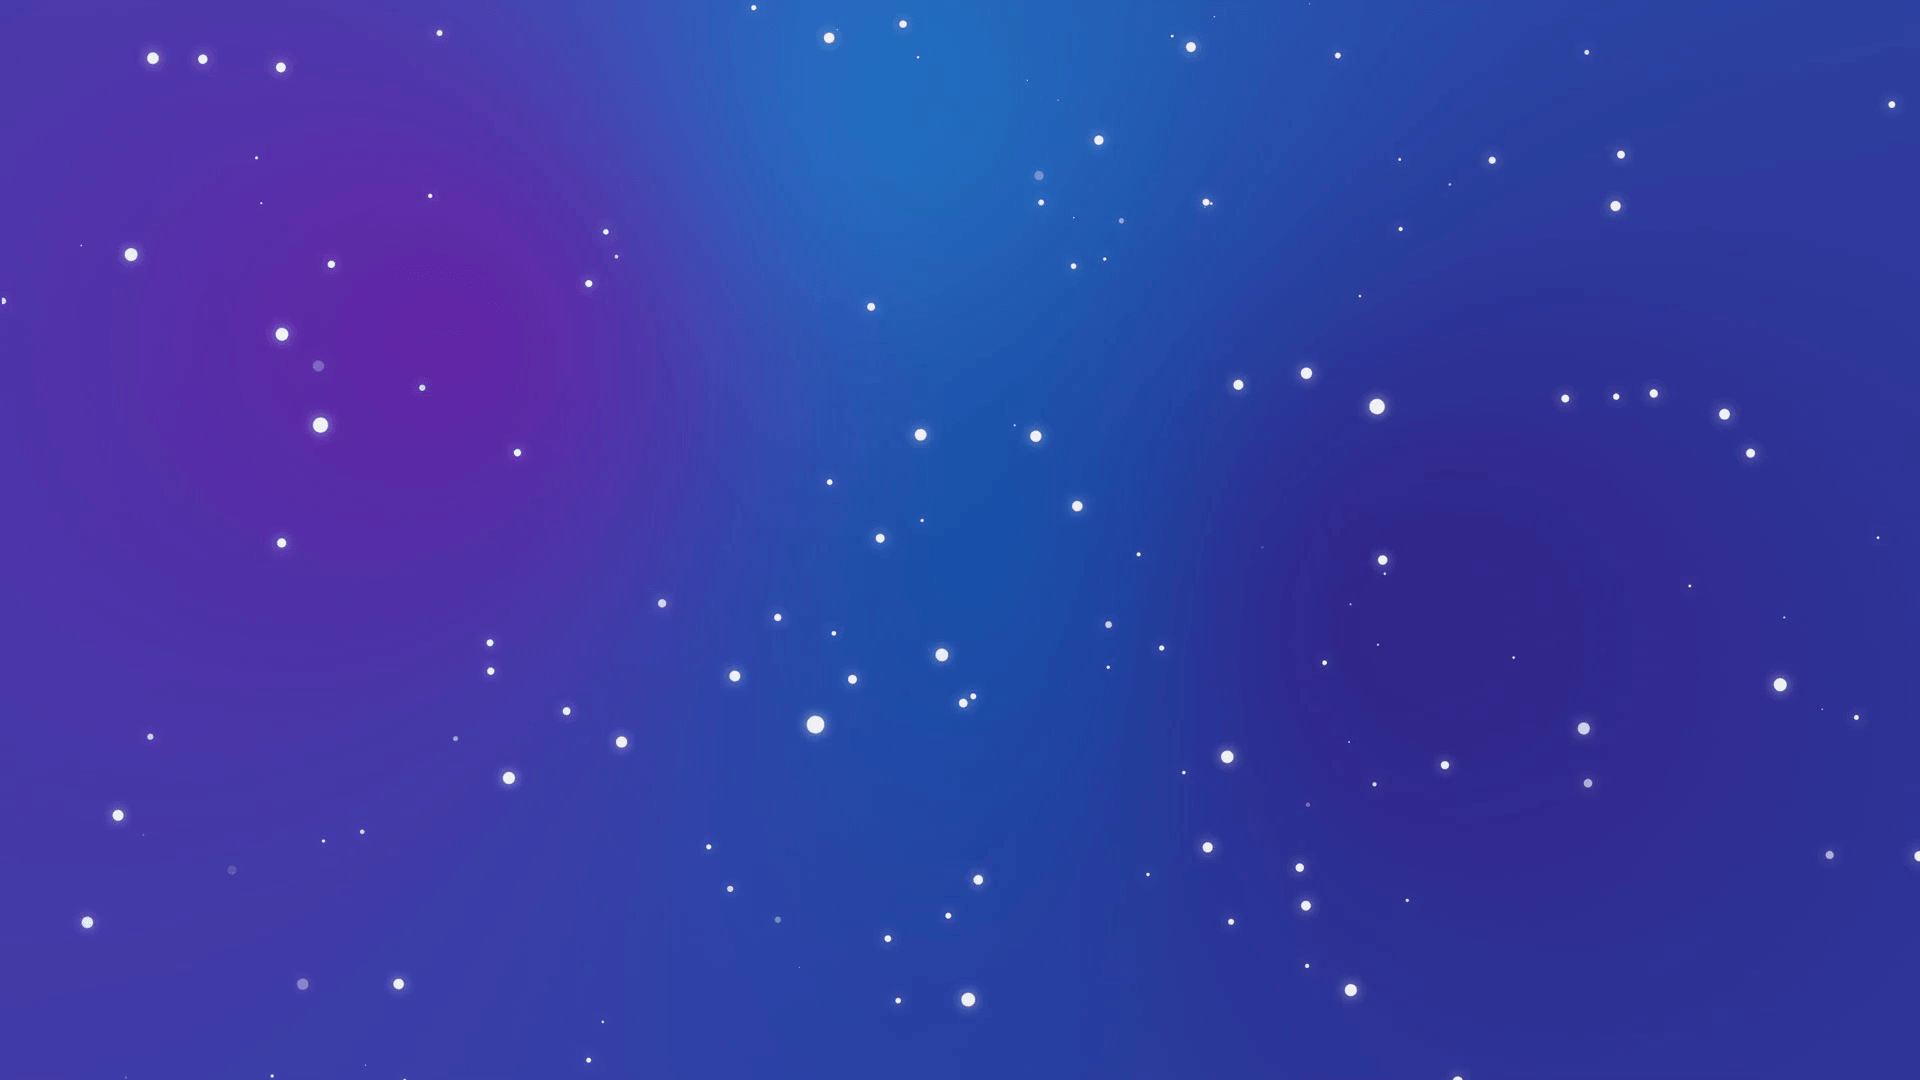 Galaxy night sky animation with shining light particle stars